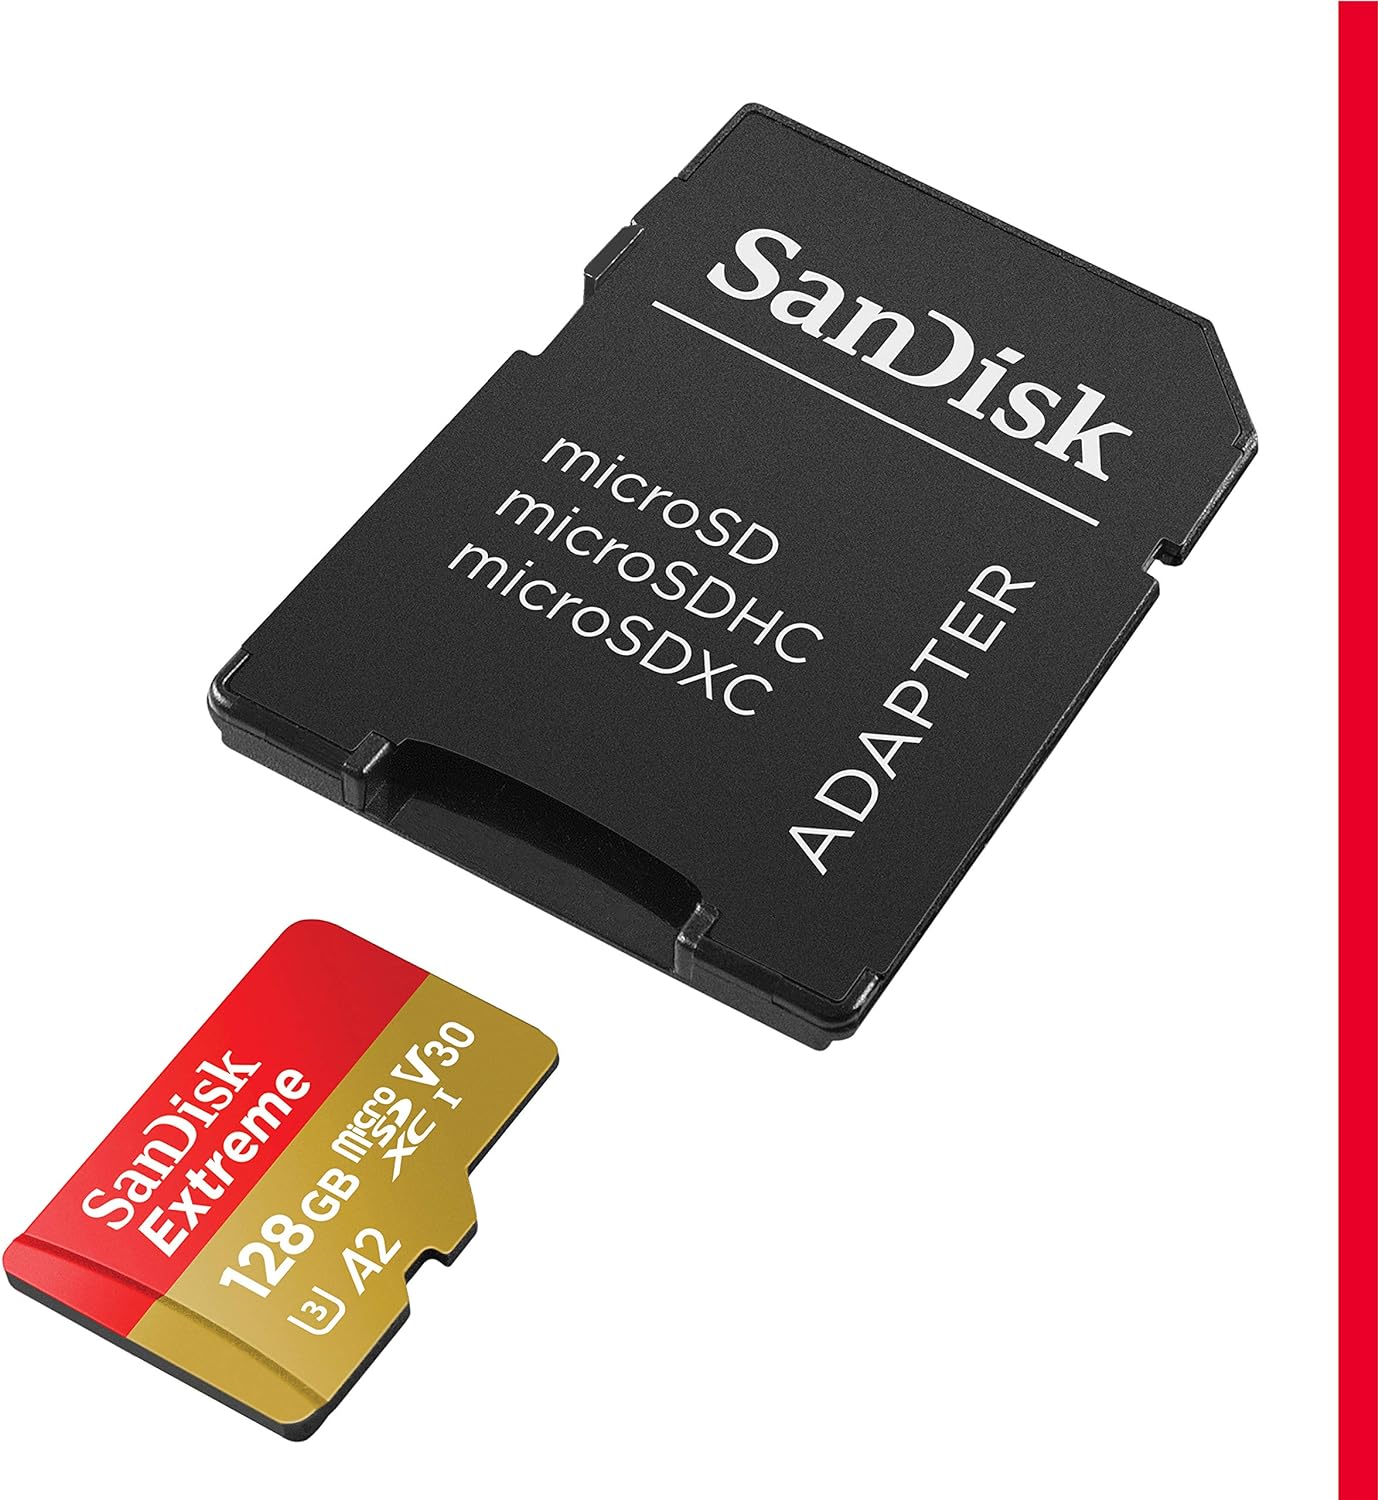 SanDisk 128GB Extreme microSDXC UHS-I Memory Card: A Comprehensive Review